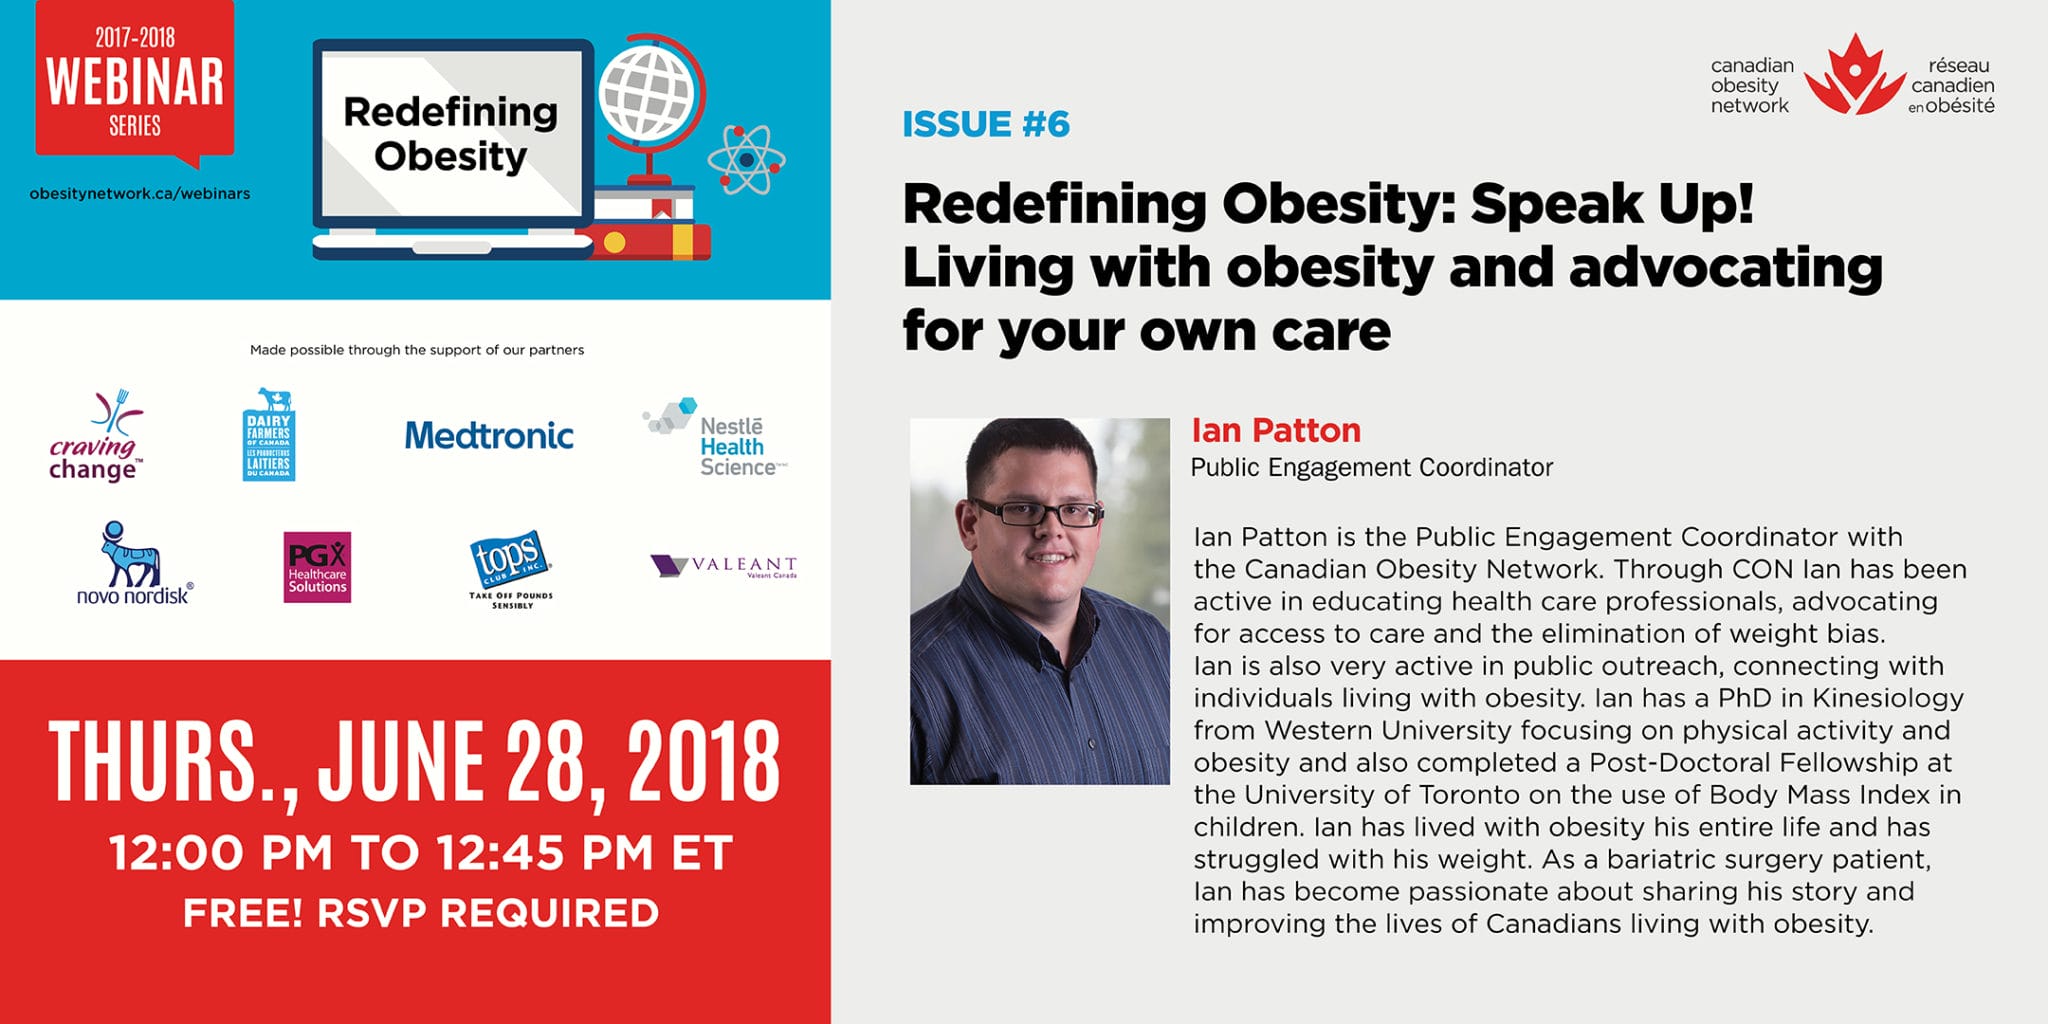 Webinar poster for "redefining obesity and advocating for change," featuring details about speaker ian patton and event information scheduled for june 28, 2018.